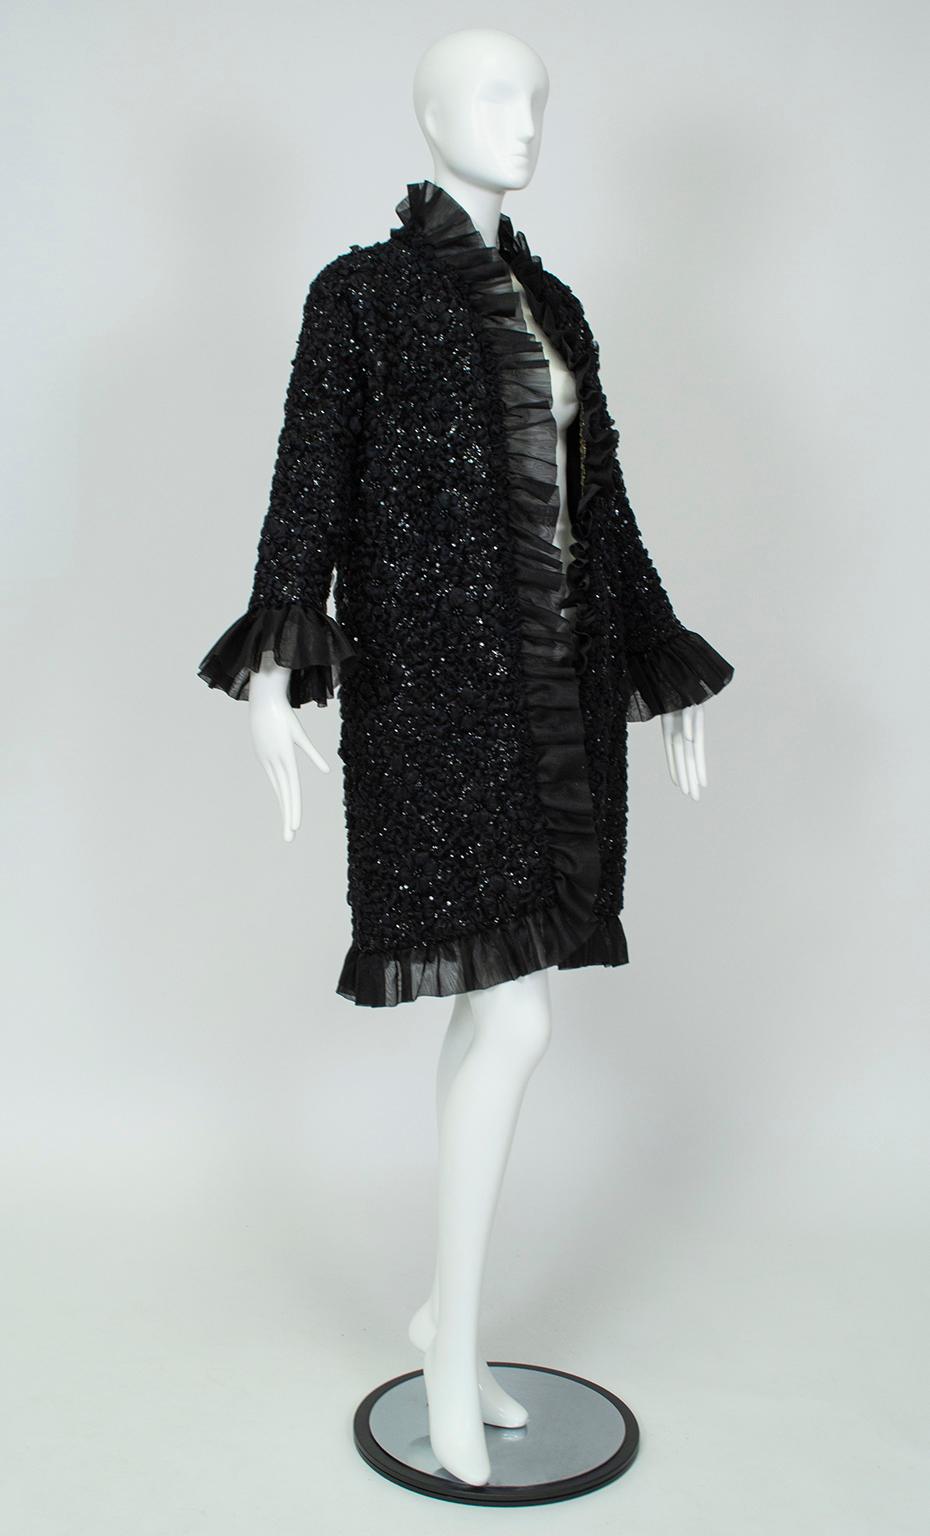 Though it looks lightweight, this clutch coat's knit base provides just enough warmth to keep you comfortable on black tie evenings, but offers a glamorous sparkle that won't spoil the outfit underneath. For a decidedly Fashion Week twist, wear it